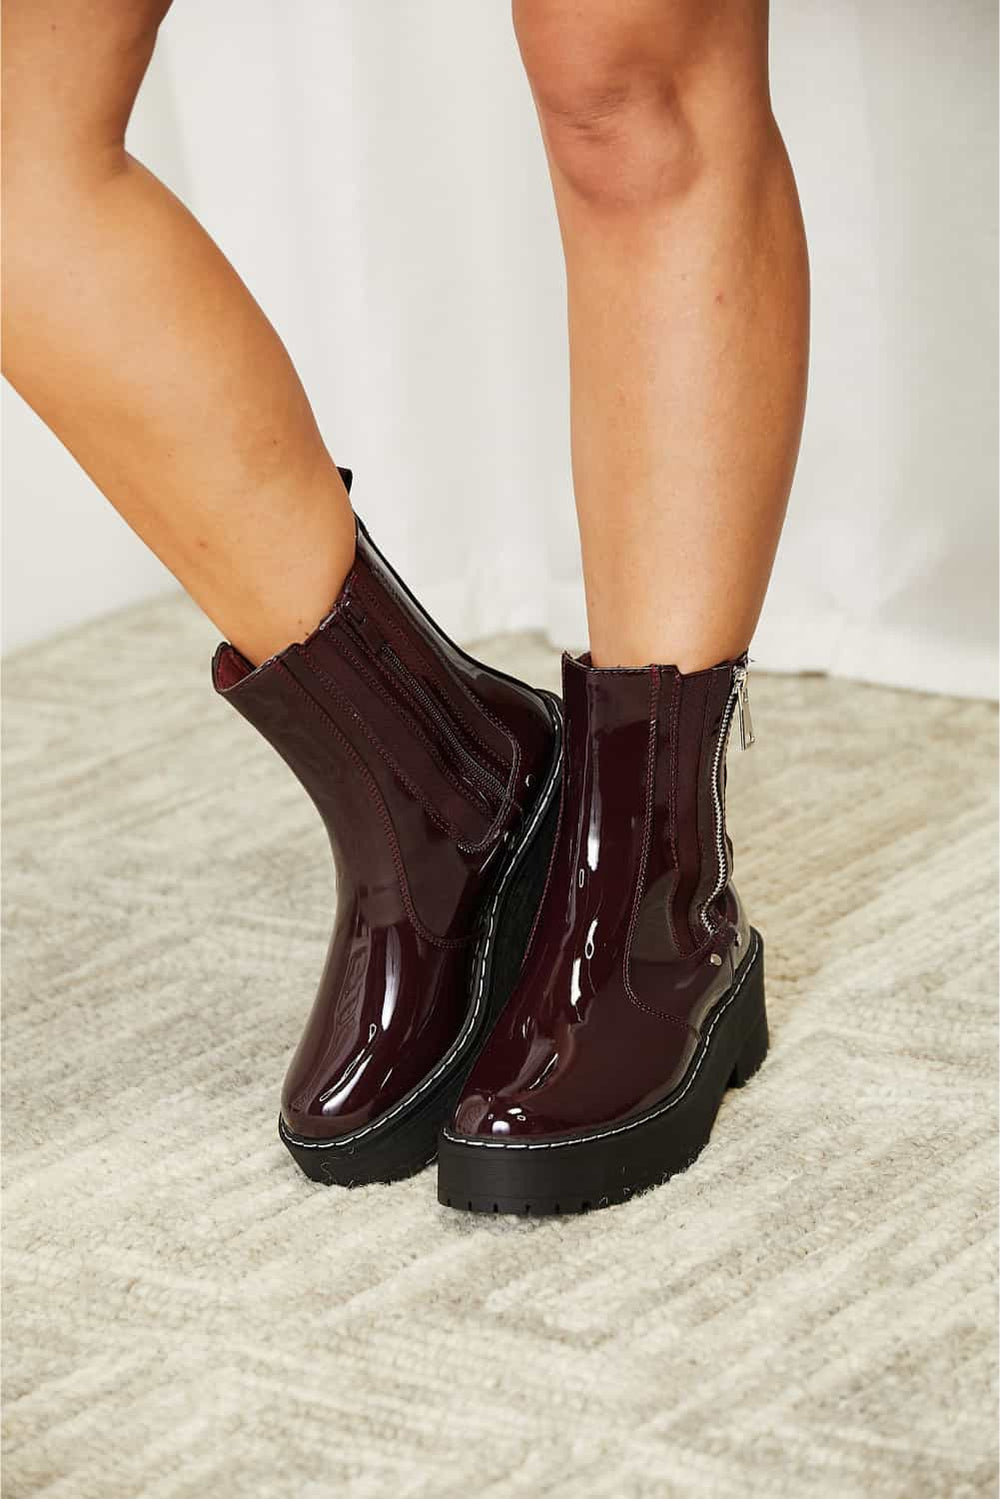 Aribelle Patent Leather Side Zip Platform Boots Shoes RYSE Clothing Co.   